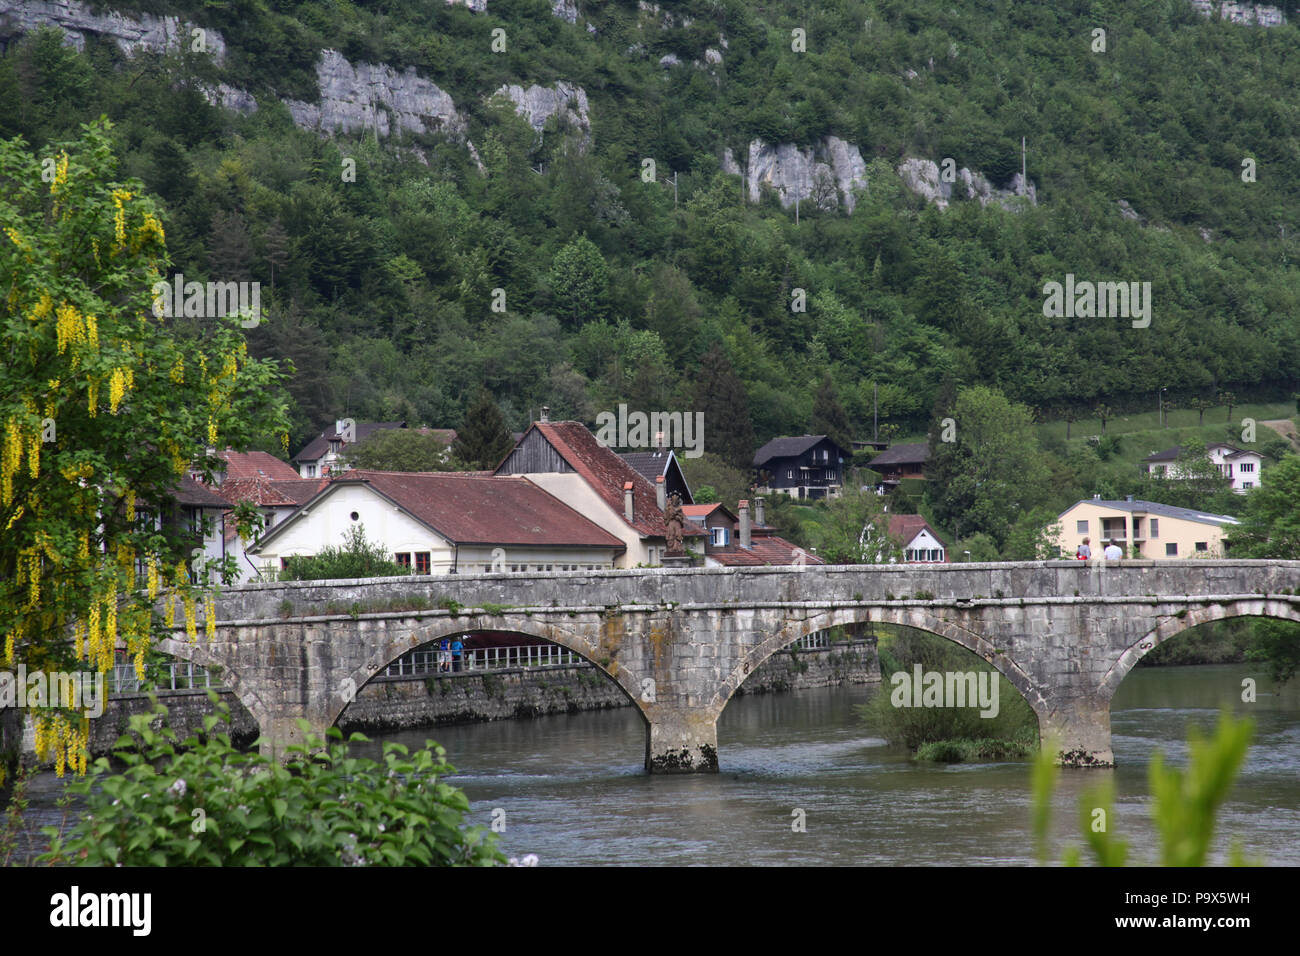 The small town St Ursanne, in Jura, Franches Montagnes, Switzerland. Stock Photo